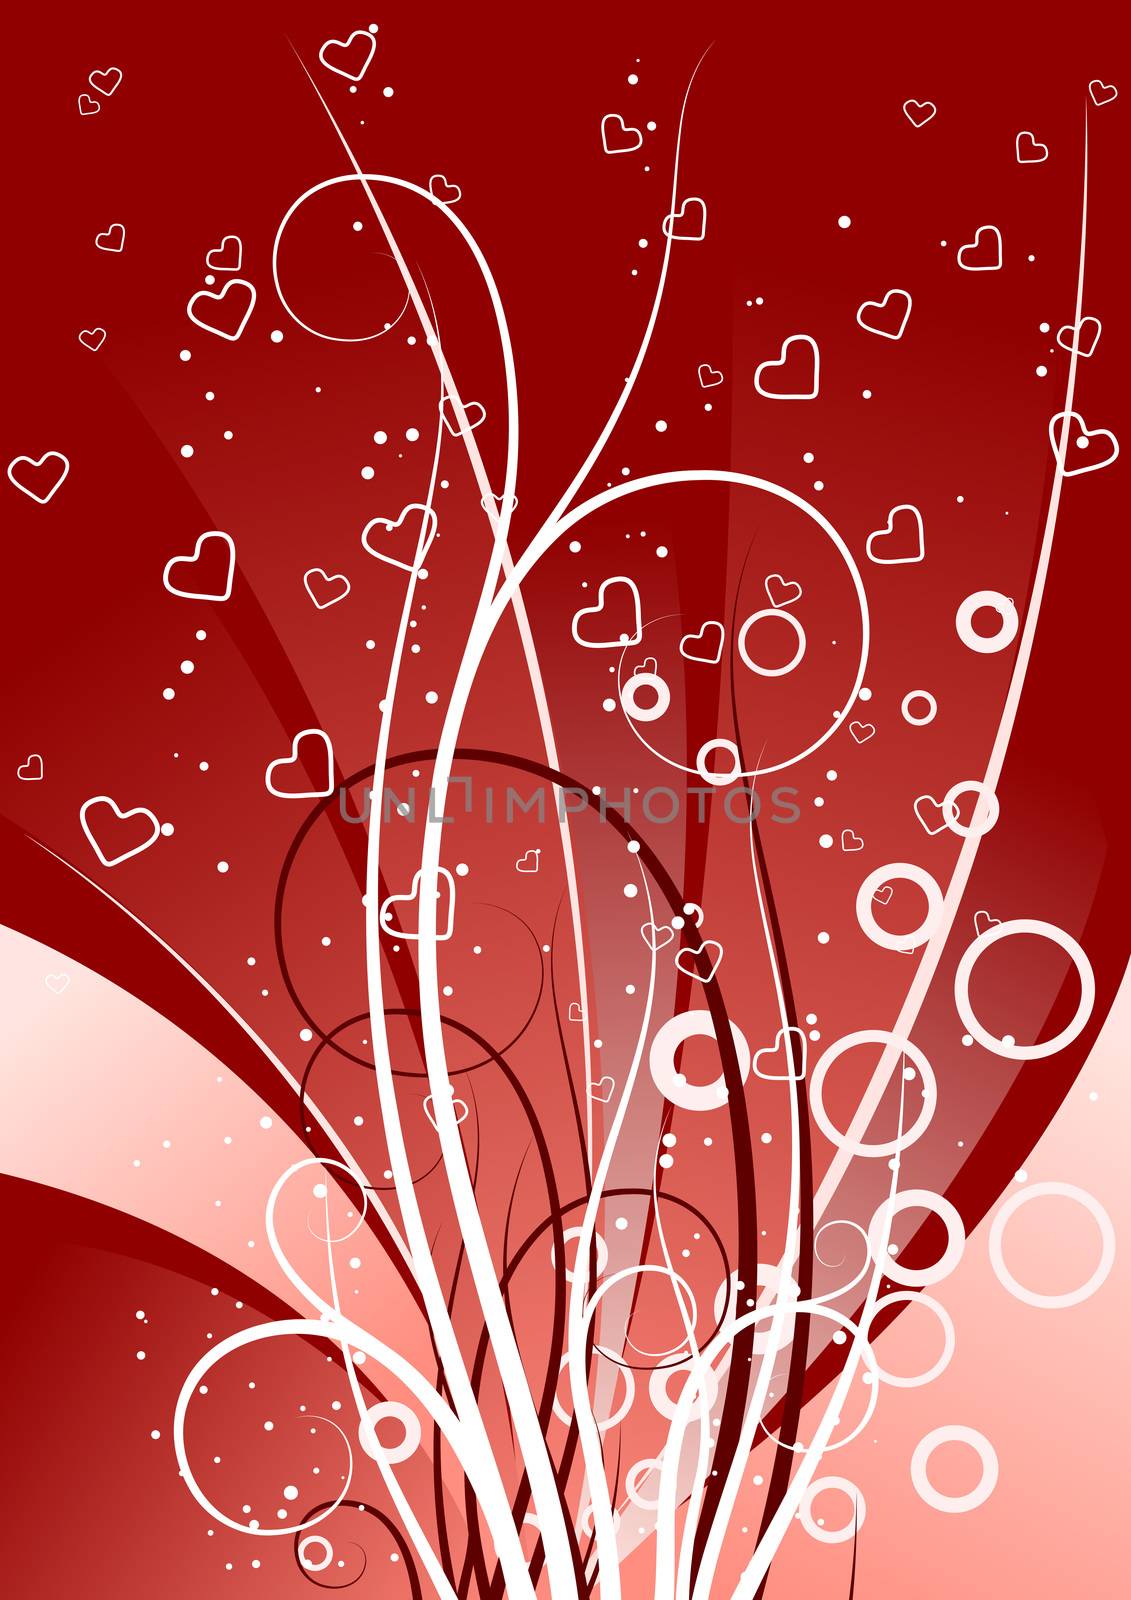 creative background with scrolls, circles and heart shapes, vect by WaD